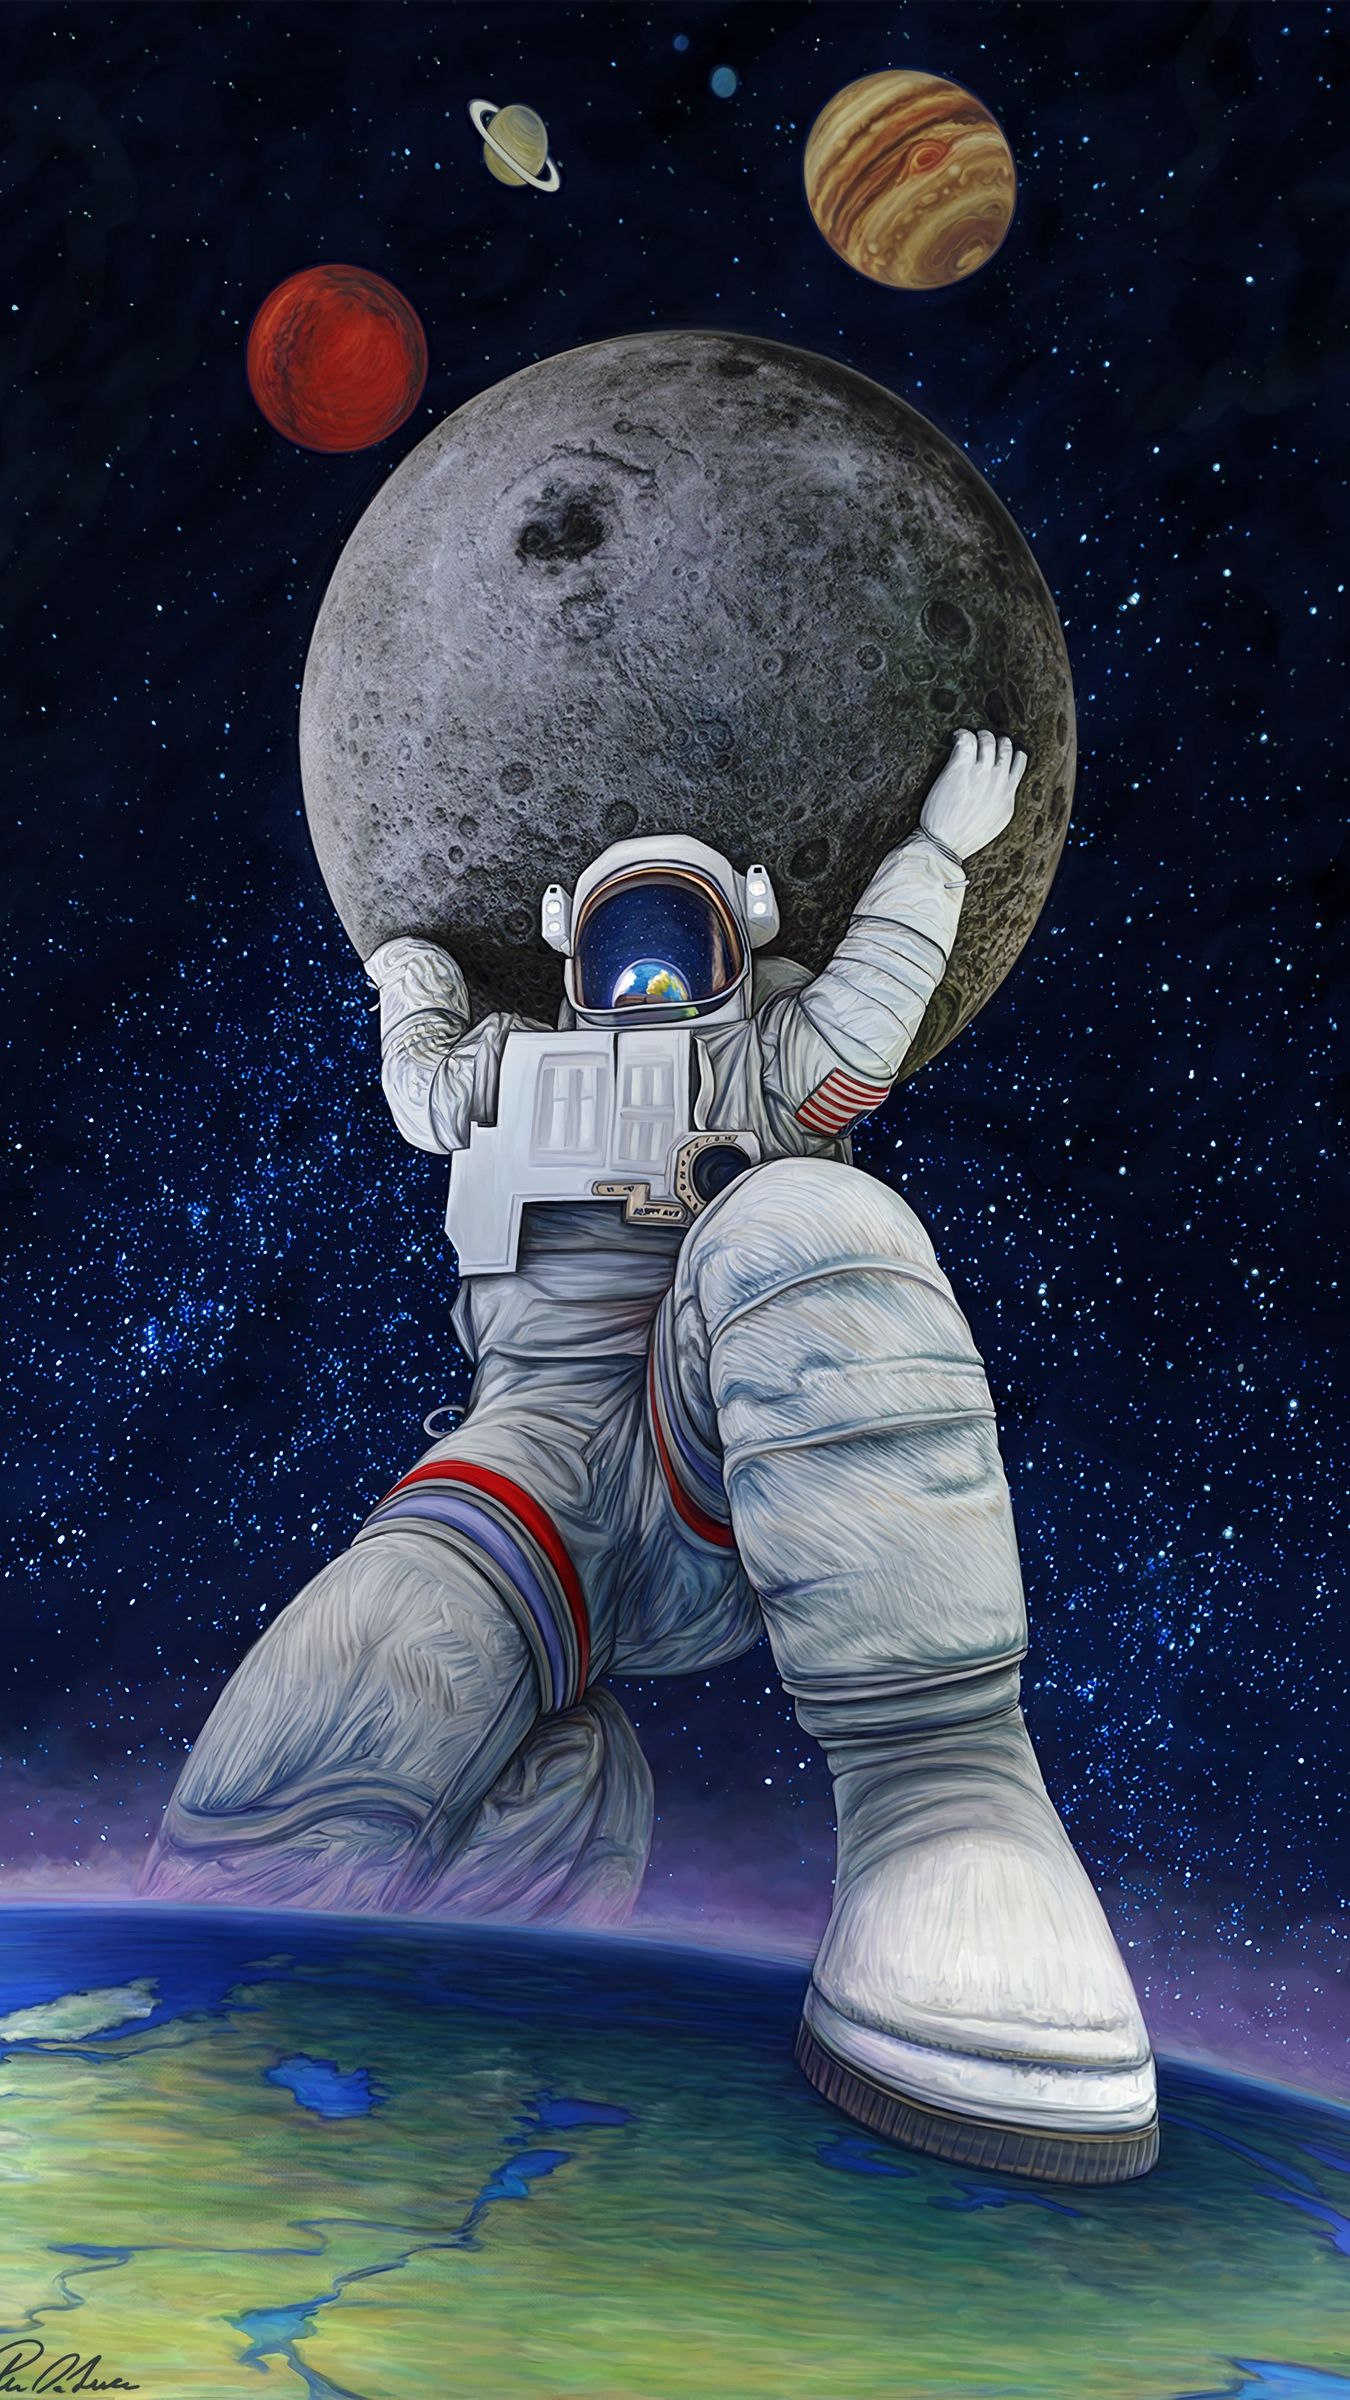 Download wallpaper 1350x2400 astronaut, giant, art, planets, space